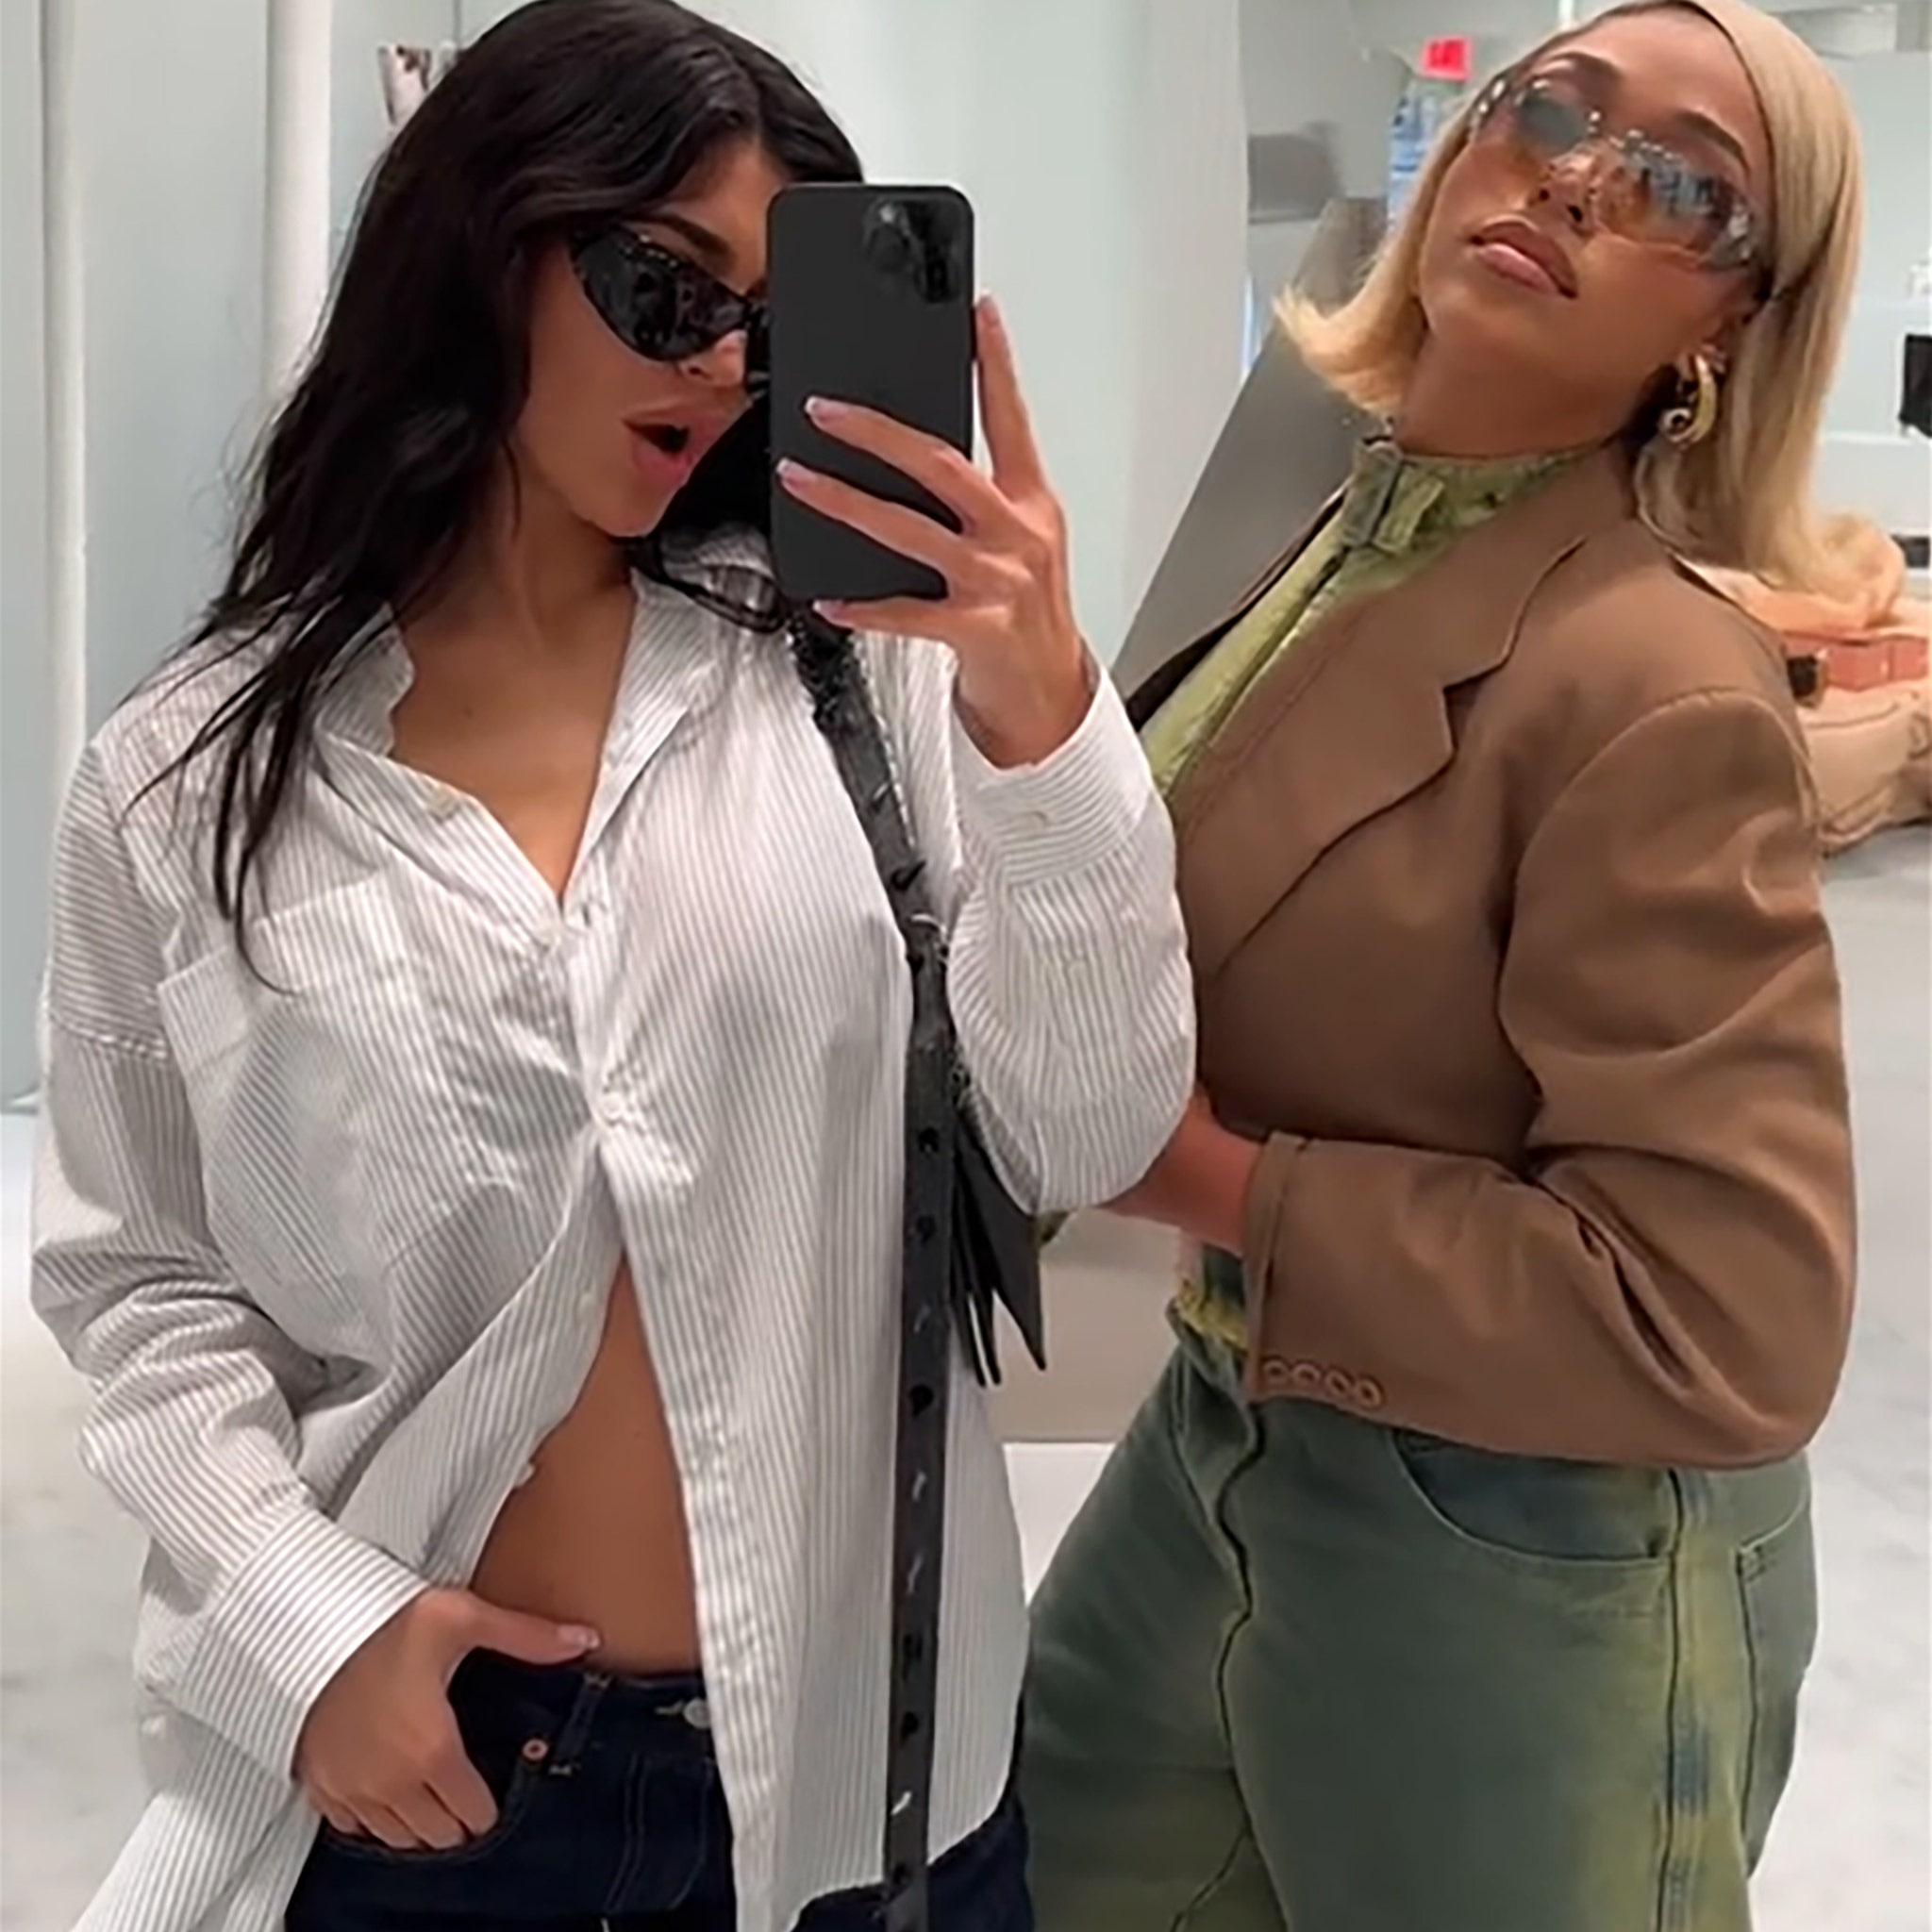 Jordyn Woods told to 'stay away' from Kylie Jenner after reunion